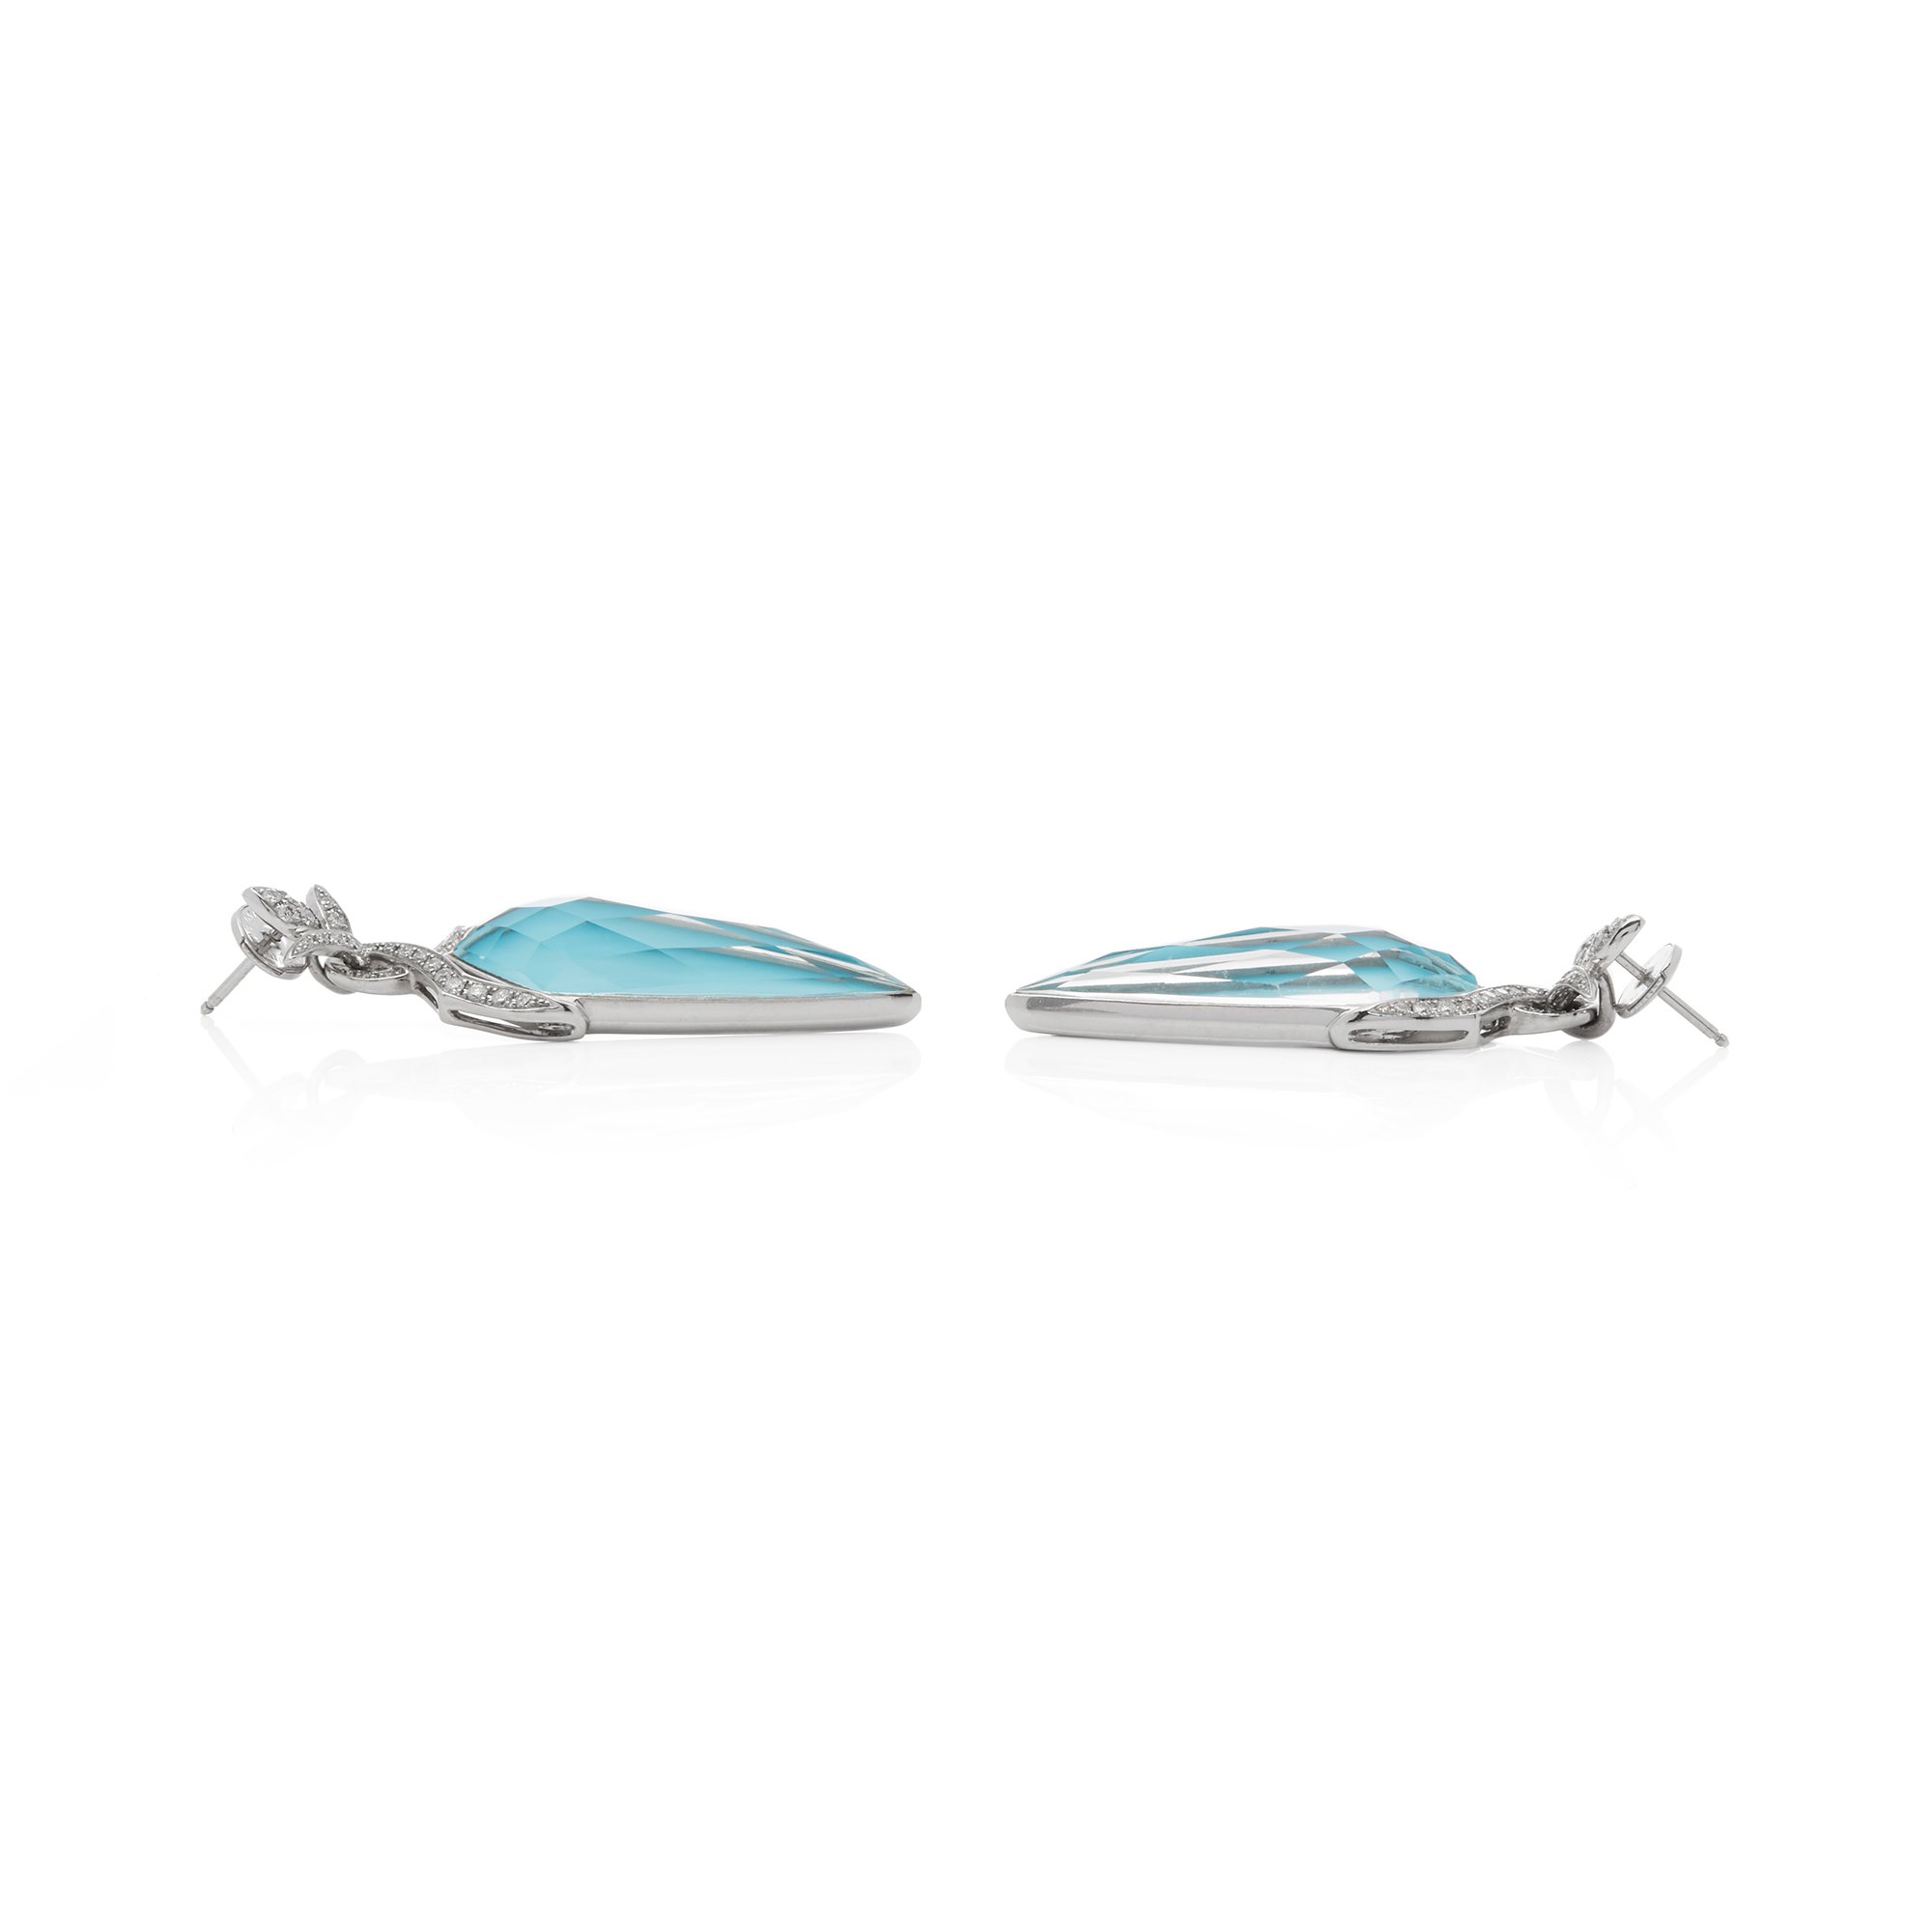 Stephen Webster Crystal Haze 18ct White Gold Turquoise Quartz and Diamond Earrings